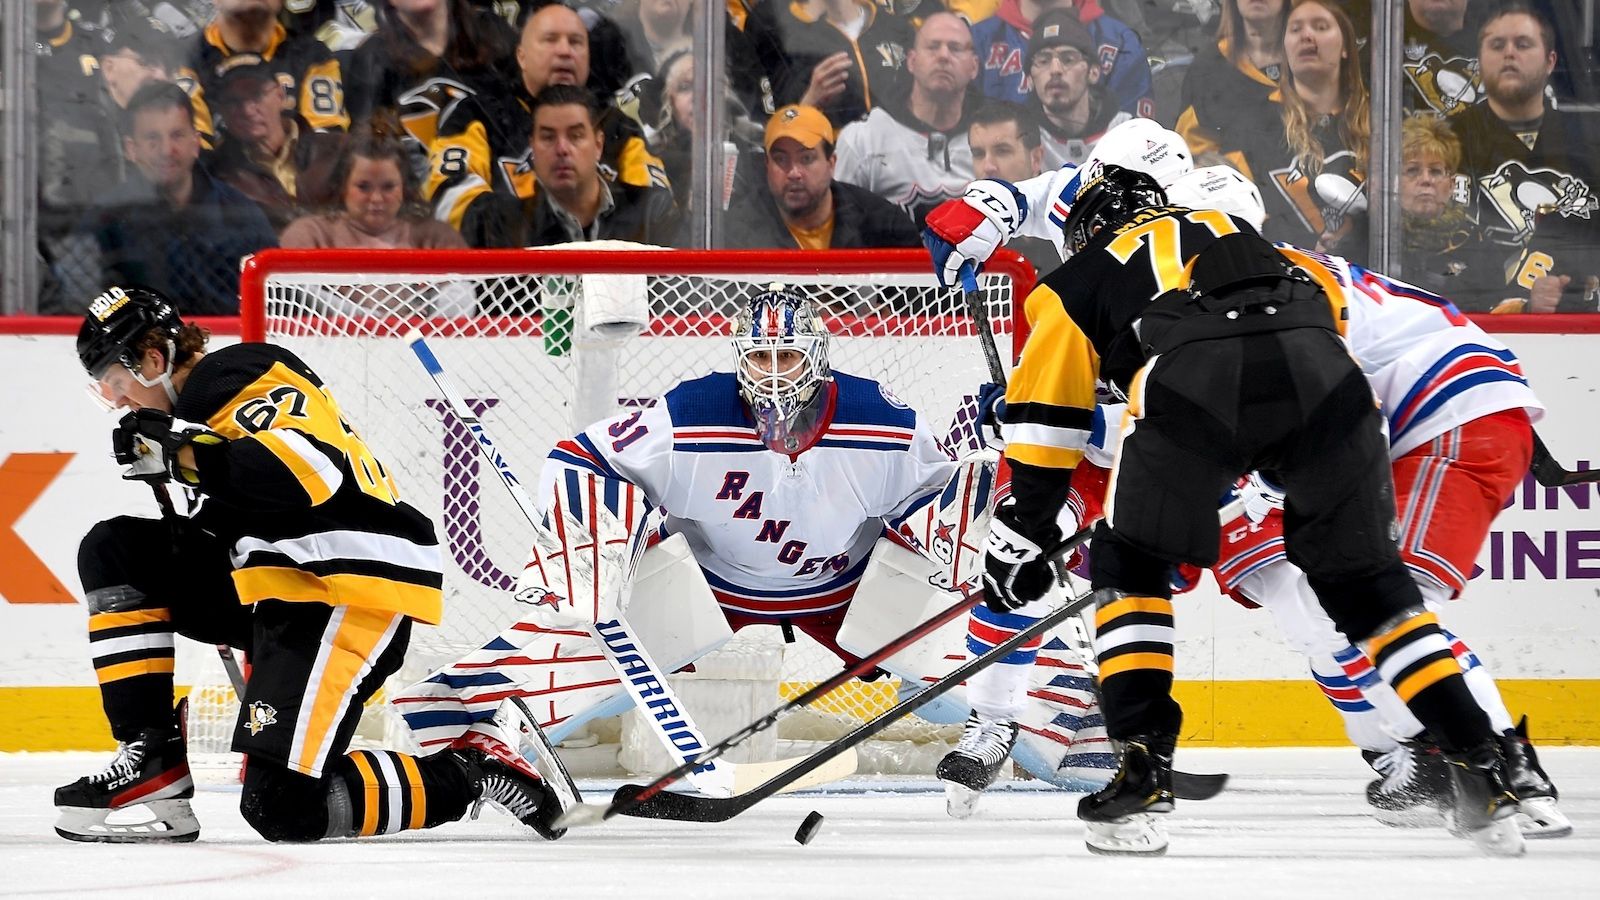 Full schedule for Penguins-Rangers first-round playoff series Dates, times, TV broadcasts